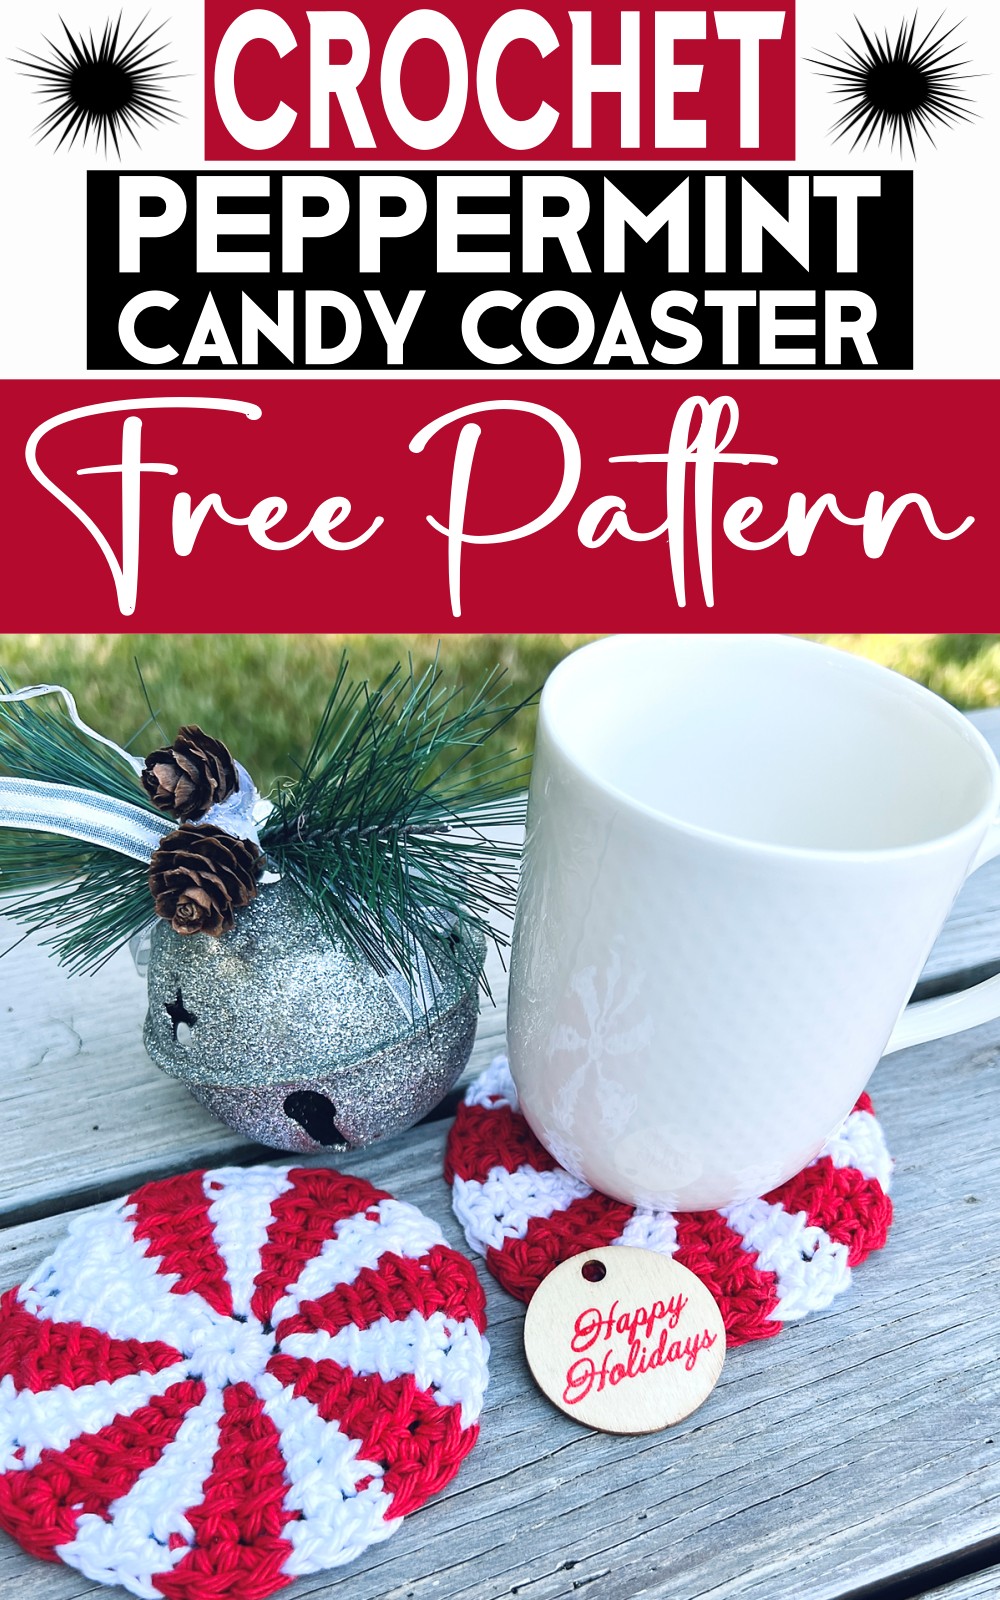 Peppermint Candy Coaster